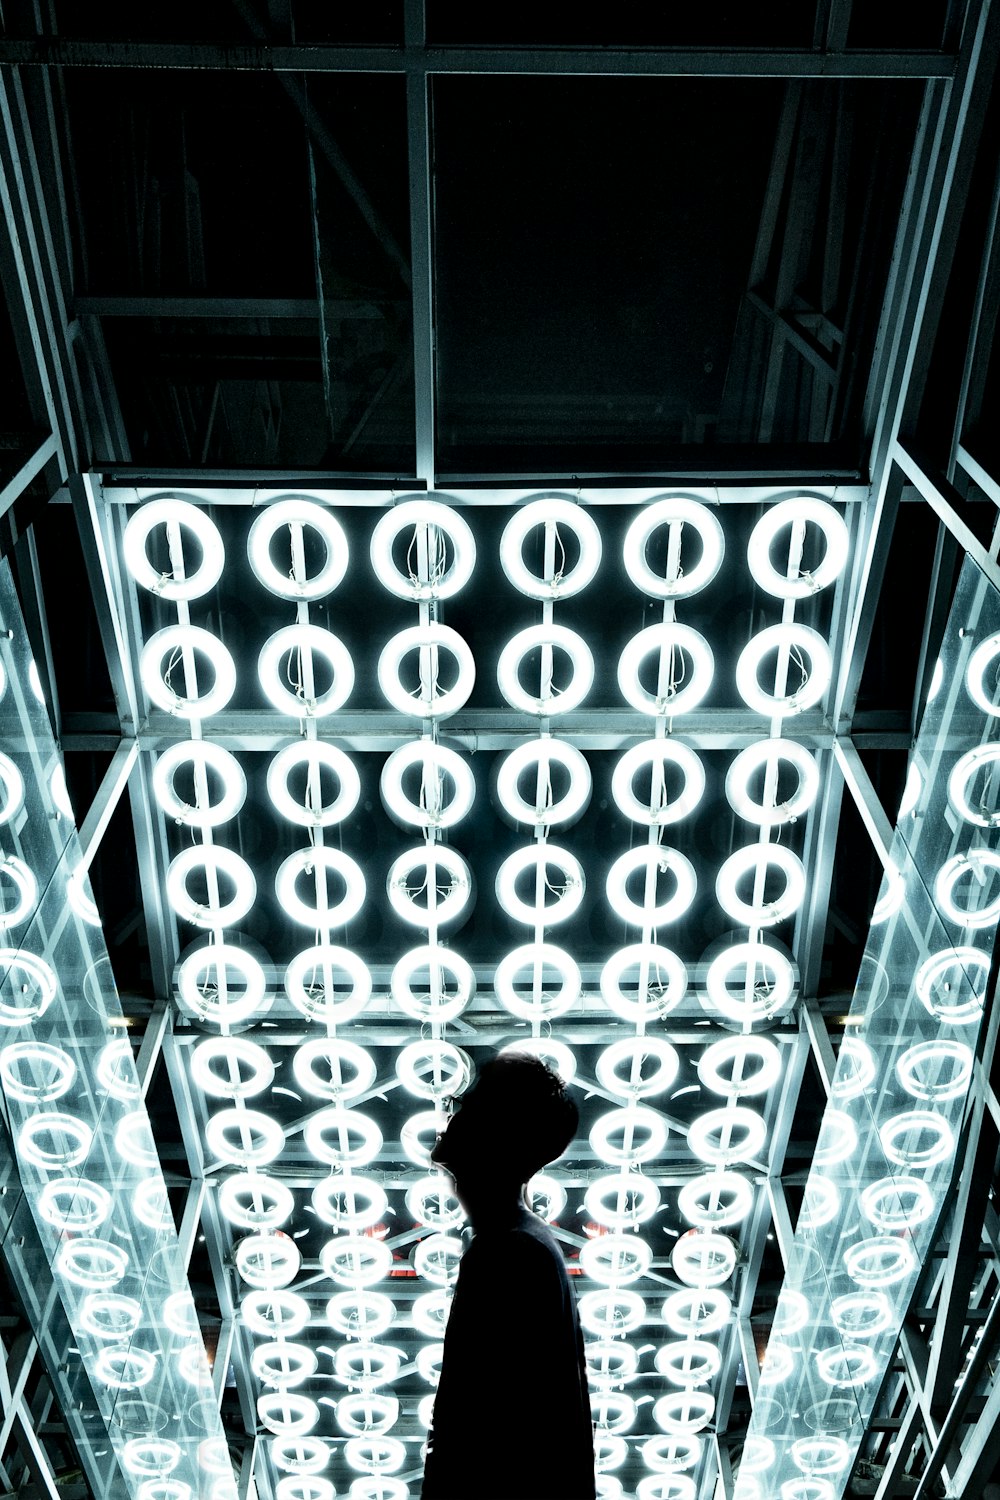 a person standing in front of a display of lights